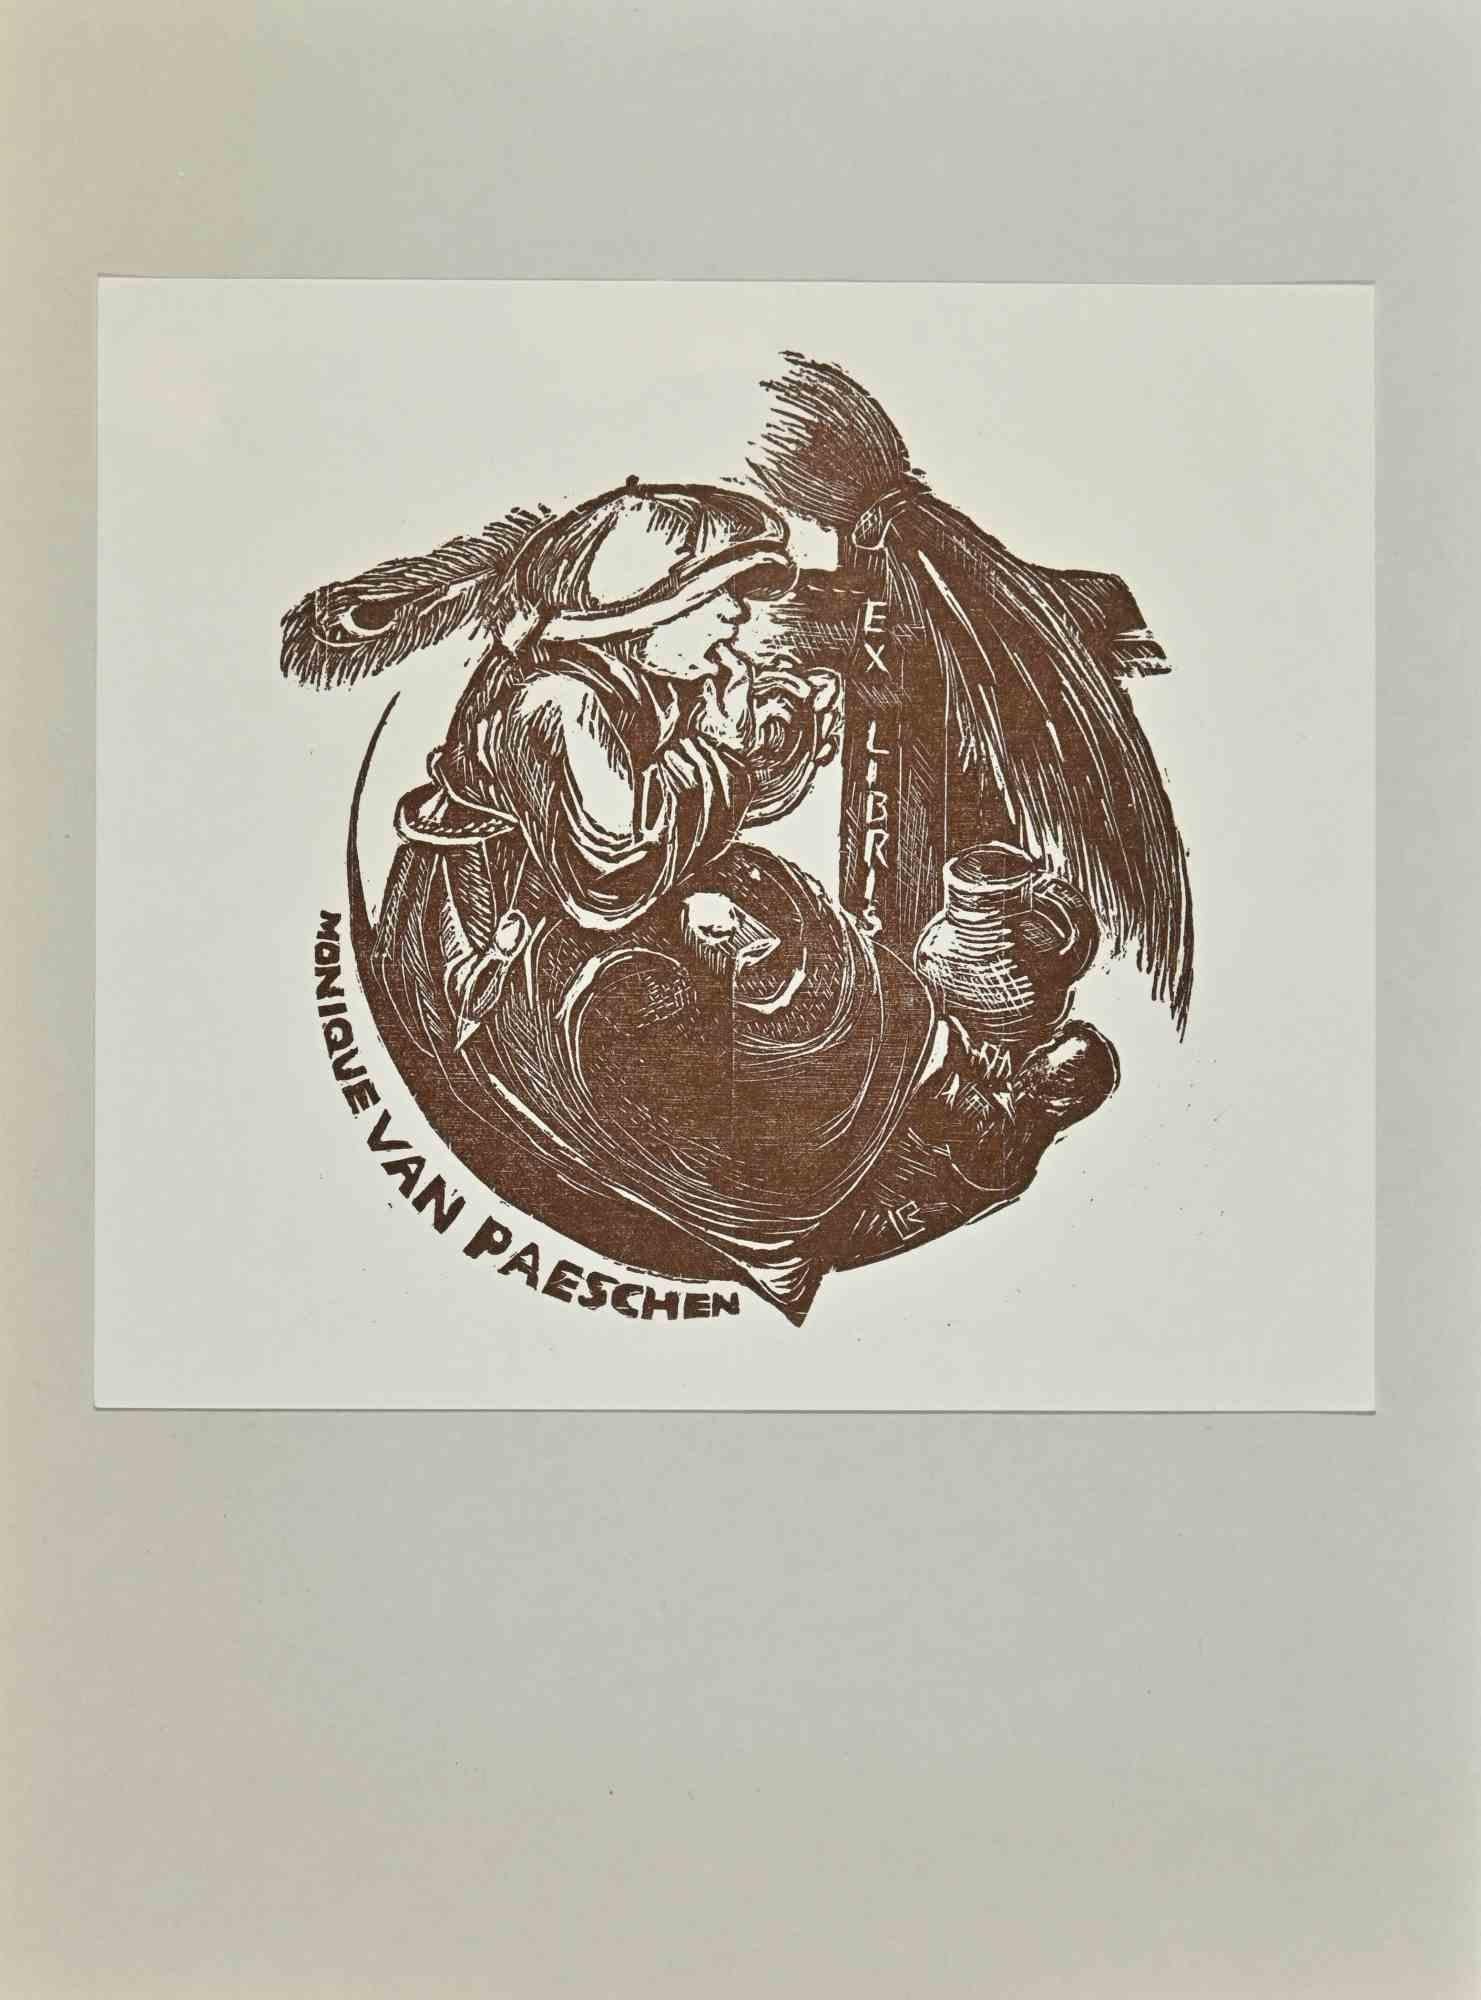 Ex Libris - Monique Van Paeschen is a Modern Artwork realized in 1982 s., by Linda Ruttelinck.
 
B/W woodcut on paper. 
 
The work is glued on grey cardboard.
 
Total dimensions: 20x 15 cm.

Excellent conditions .

The artwork represents a